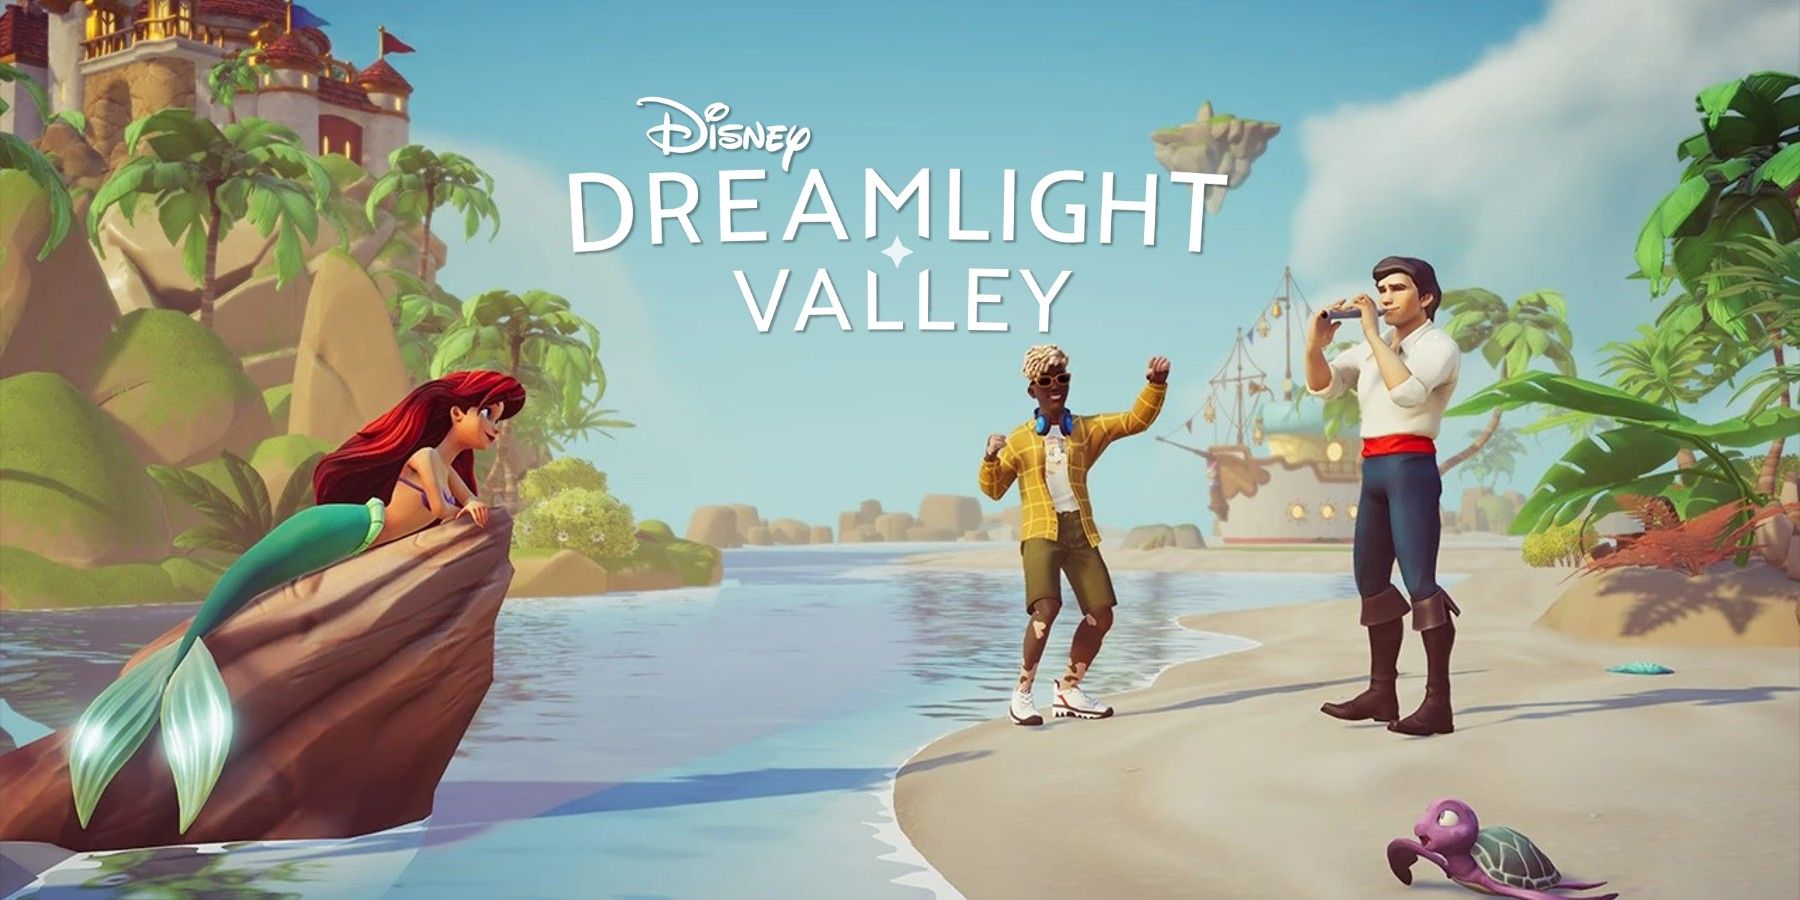 When is the next Dreamlight Valley update release date?